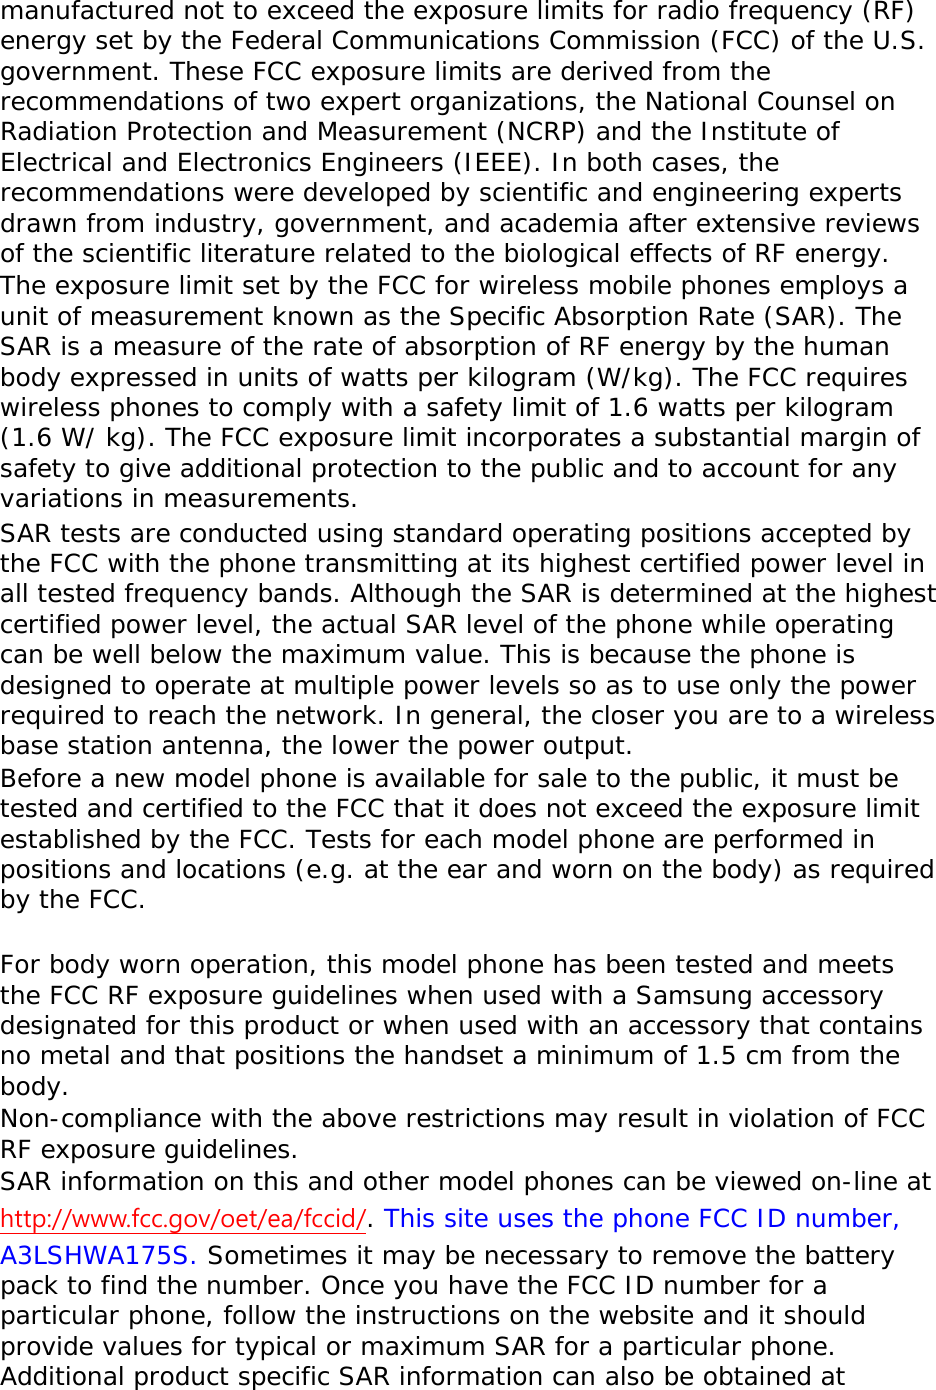 manufactured not to exceed the exposure limits for radio frequency (RF) energy set by the Federal Communications Commission (FCC) of the U.S. government. These FCC exposure limits are derived from the recommendations of two expert organizations, the National Counsel on Radiation Protection and Measurement (NCRP) and the Institute of Electrical and Electronics Engineers (IEEE). In both cases, the recommendations were developed by scientific and engineering experts drawn from industry, government, and academia after extensive reviews of the scientific literature related to the biological effects of RF energy. The exposure limit set by the FCC for wireless mobile phones employs a unit of measurement known as the Specific Absorption Rate (SAR). The SAR is a measure of the rate of absorption of RF energy by the human body expressed in units of watts per kilogram (W/kg). The FCC requires wireless phones to comply with a safety limit of 1.6 watts per kilogram (1.6 W/ kg). The FCC exposure limit incorporates a substantial margin of safety to give additional protection to the public and to account for any variations in measurements. SAR tests are conducted using standard operating positions accepted by the FCC with the phone transmitting at its highest certified power level in all tested frequency bands. Although the SAR is determined at the highest certified power level, the actual SAR level of the phone while operating can be well below the maximum value. This is because the phone is designed to operate at multiple power levels so as to use only the power required to reach the network. In general, the closer you are to a wireless base station antenna, the lower the power output. Before a new model phone is available for sale to the public, it must be tested and certified to the FCC that it does not exceed the exposure limit established by the FCC. Tests for each model phone are performed in positions and locations (e.g. at the ear and worn on the body) as required by the FCC.    For body worn operation, this model phone has been tested and meets the FCC RF exposure guidelines when used with a Samsung accessory designated for this product or when used with an accessory that contains no metal and that positions the handset a minimum of 1.5 cm from the body.  Non-compliance with the above restrictions may result in violation of FCC RF exposure guidelines. SAR information on this and other model phones can be viewed on-line at http://www.fcc.gov/oet/ea/fccid/. This site uses the phone FCC ID number, A3LSHWA175S. Sometimes it may be necessary to remove the battery pack to find the number. Once you have the FCC ID number for a particular phone, follow the instructions on the website and it should provide values for typical or maximum SAR for a particular phone. Additional product specific SAR information can also be obtained at 